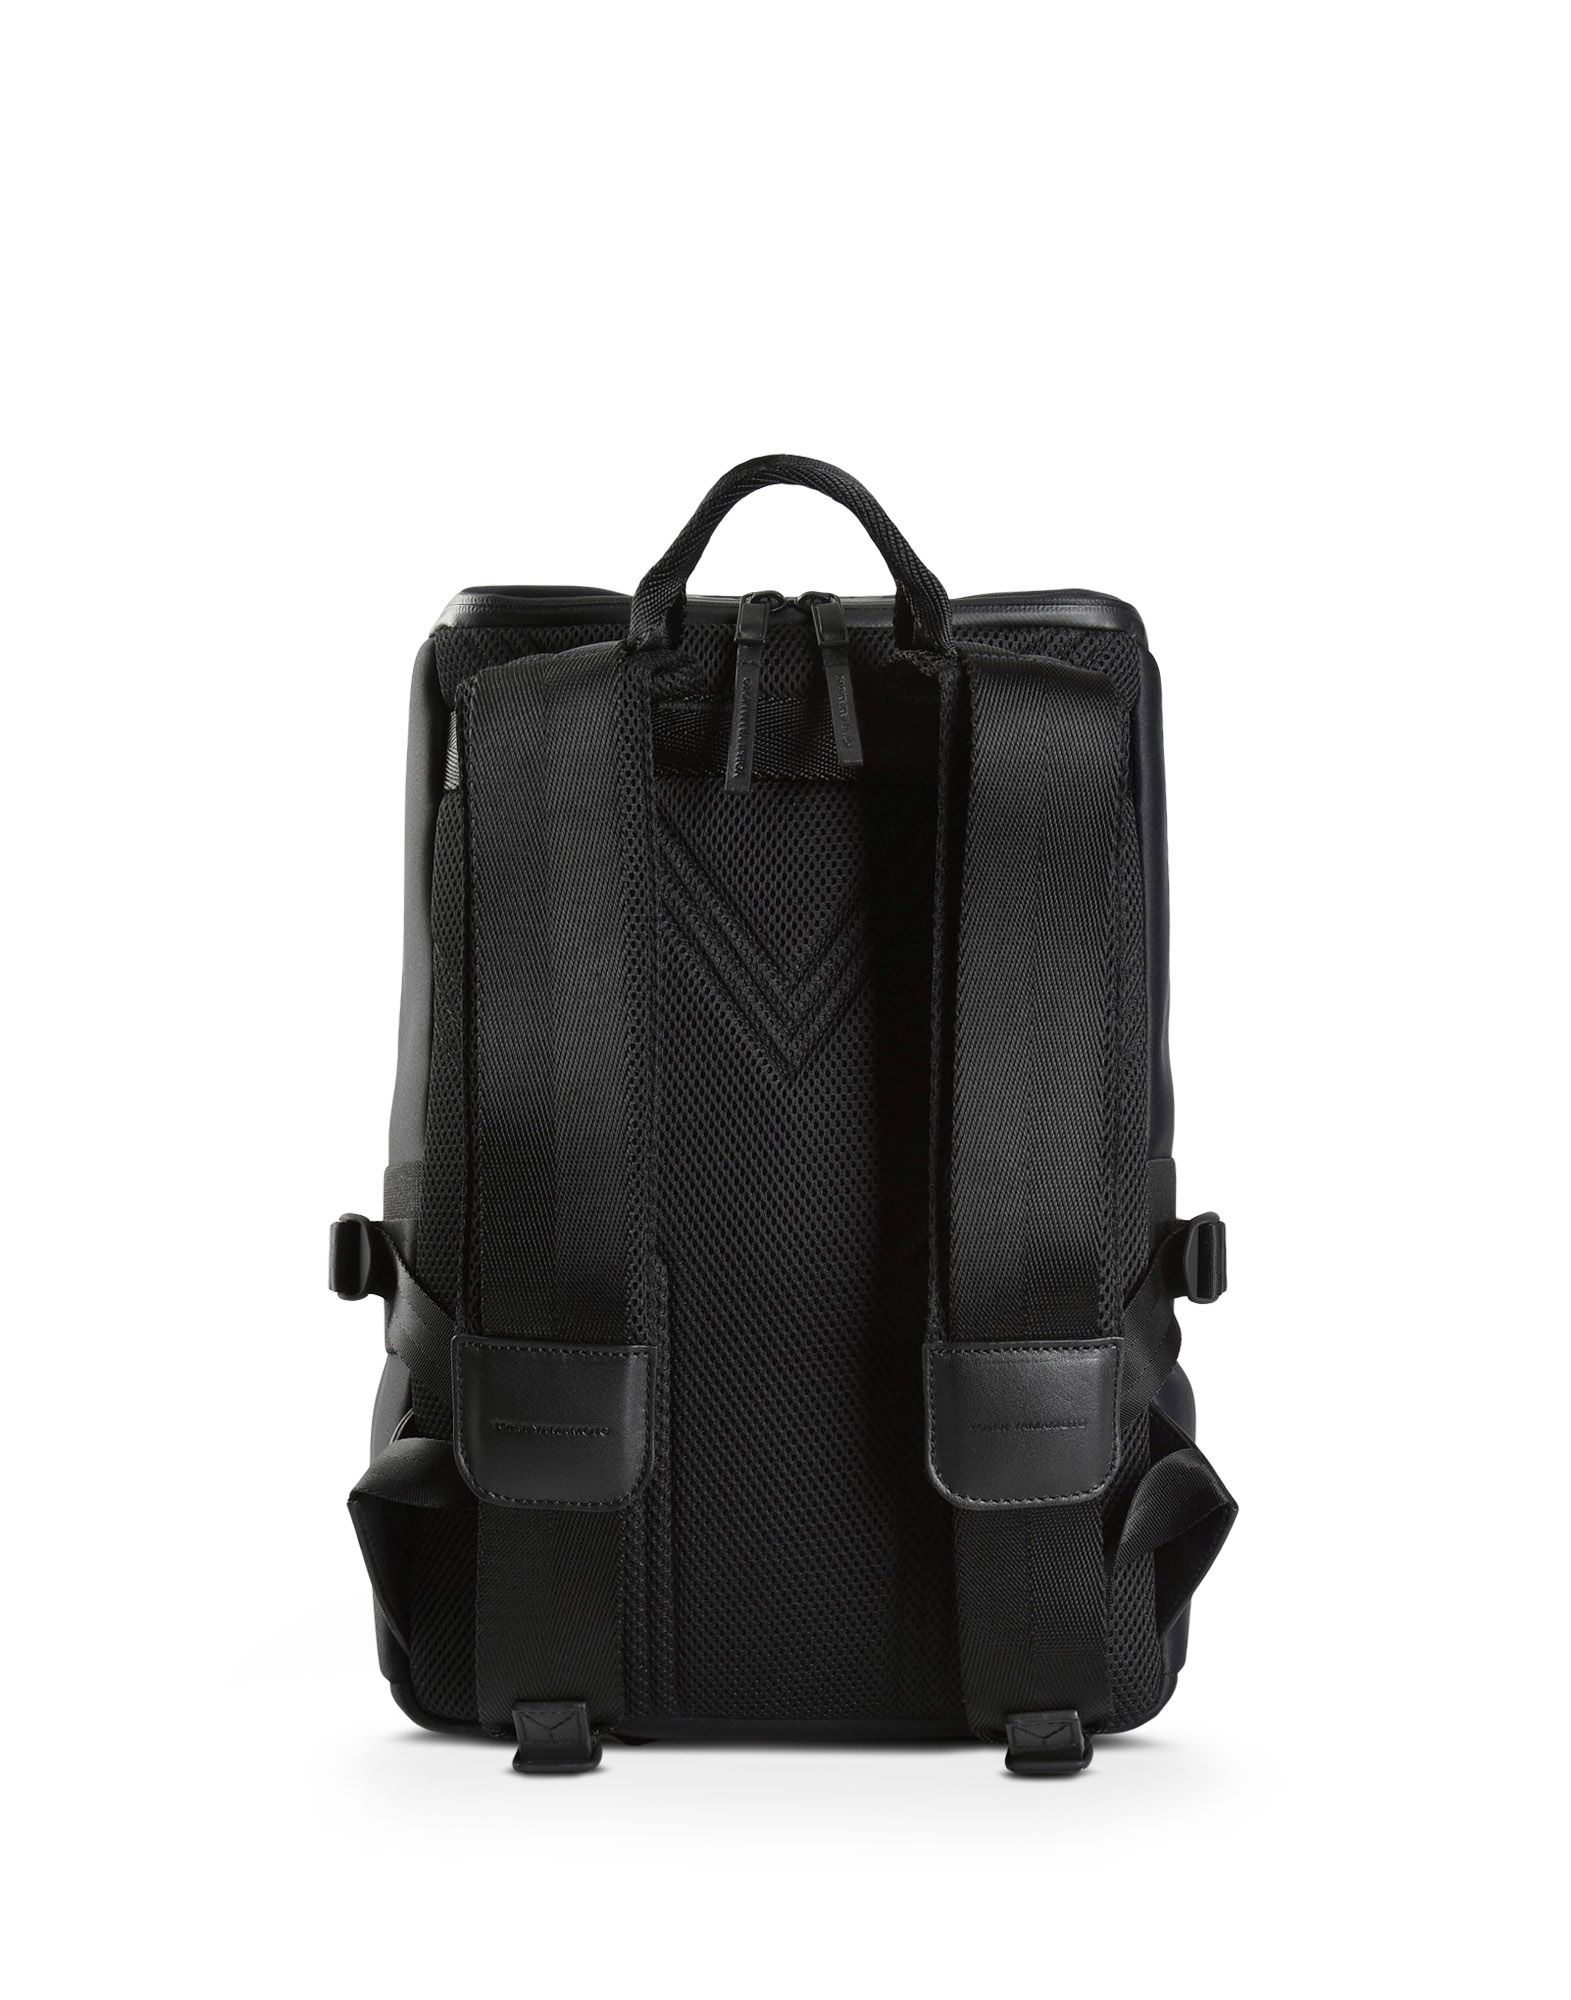 Y 3 QASA BACKPACK SMALL for Women | Adidas Y-3 Official Store